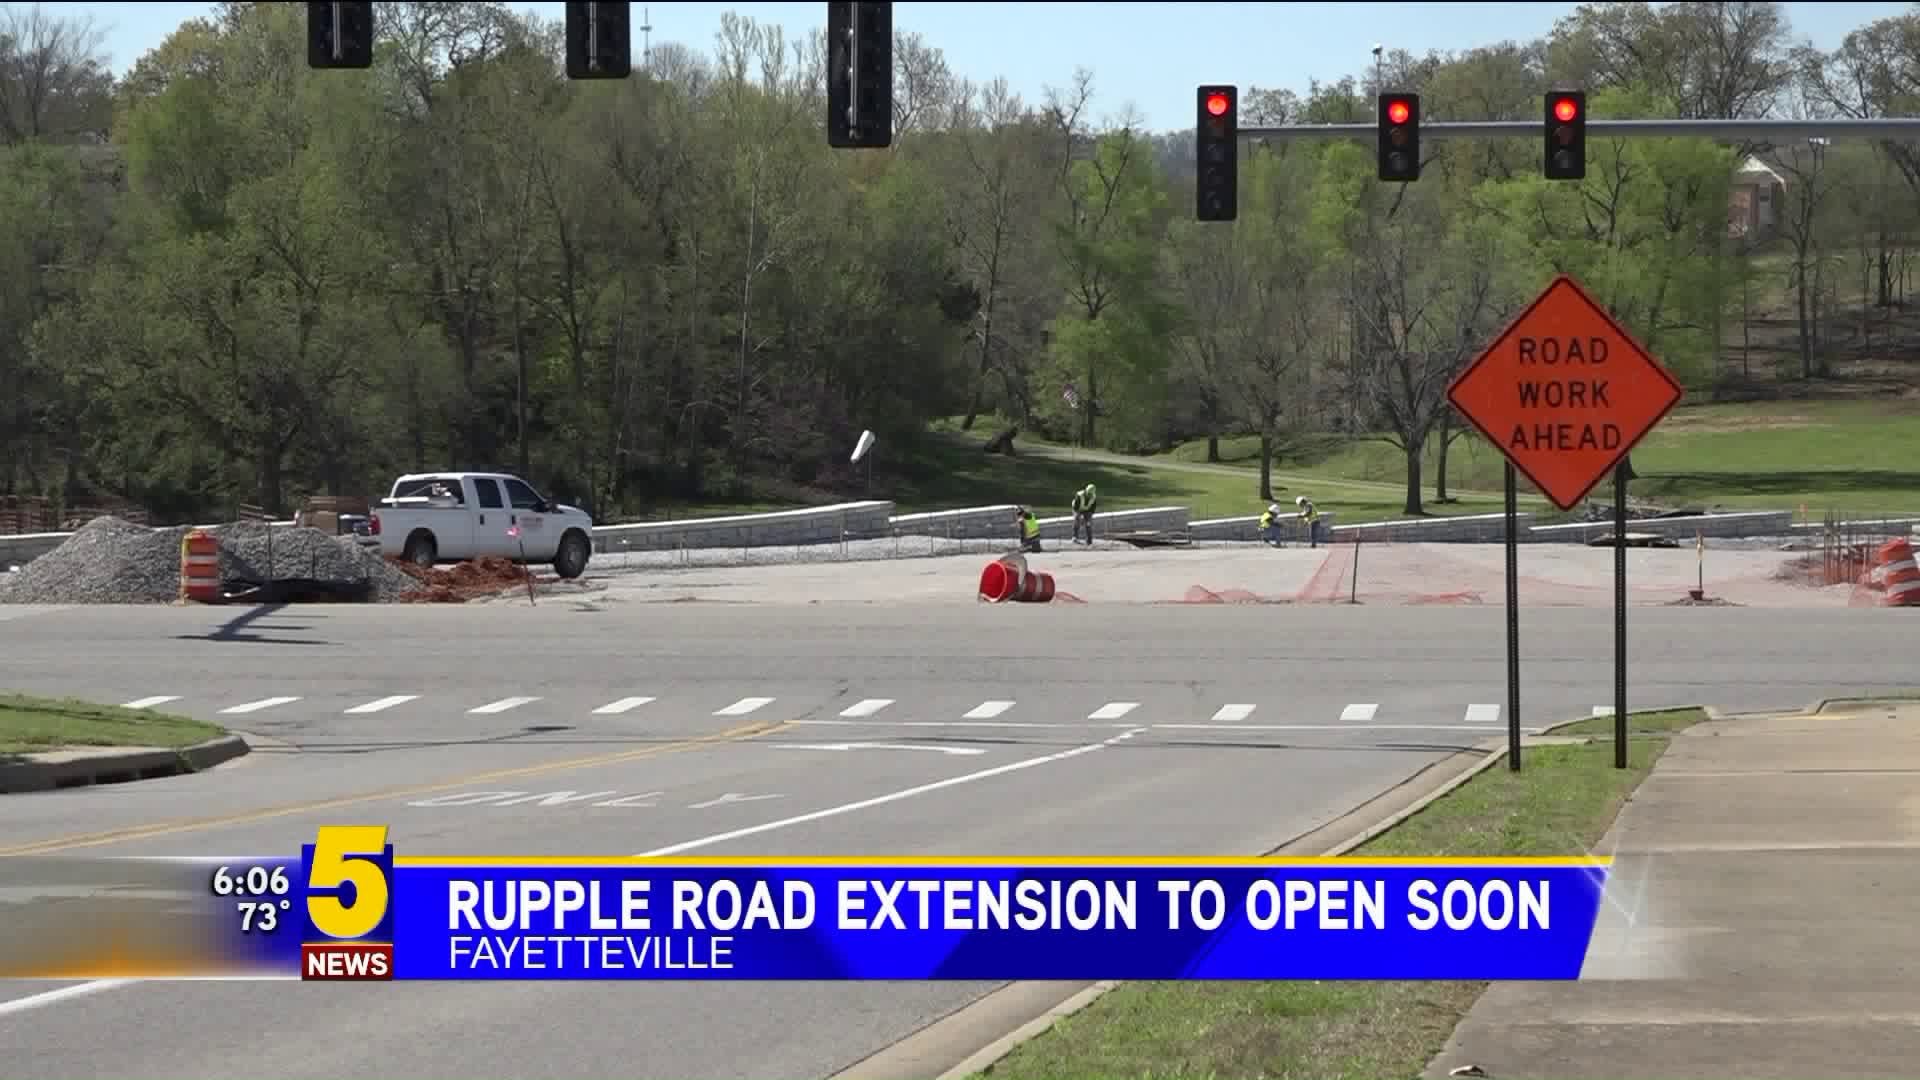 Rupple Road Extension Opening Soon